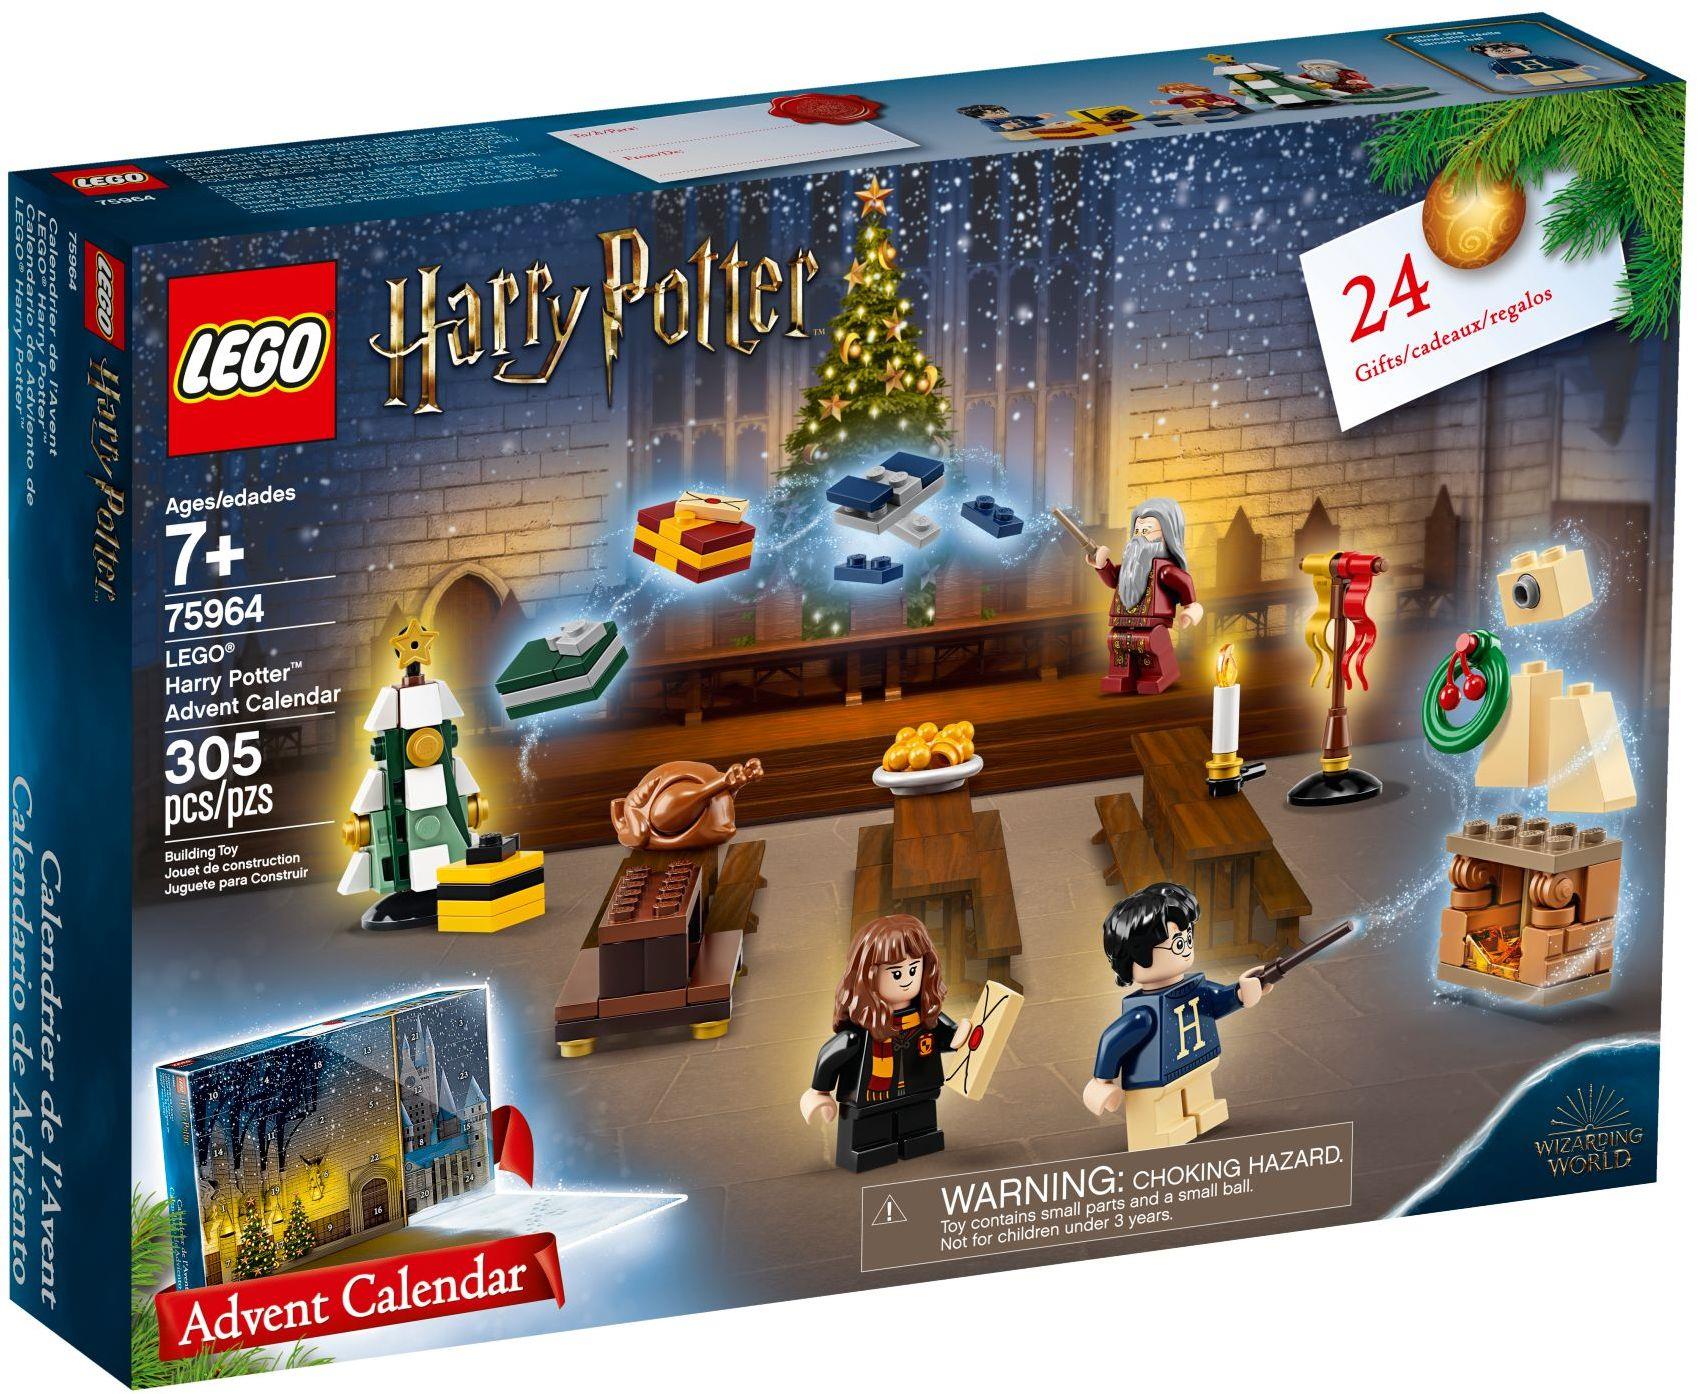 75981 New 2020 Lego Harry Potter Advent Calendar IN HAND Sealed 